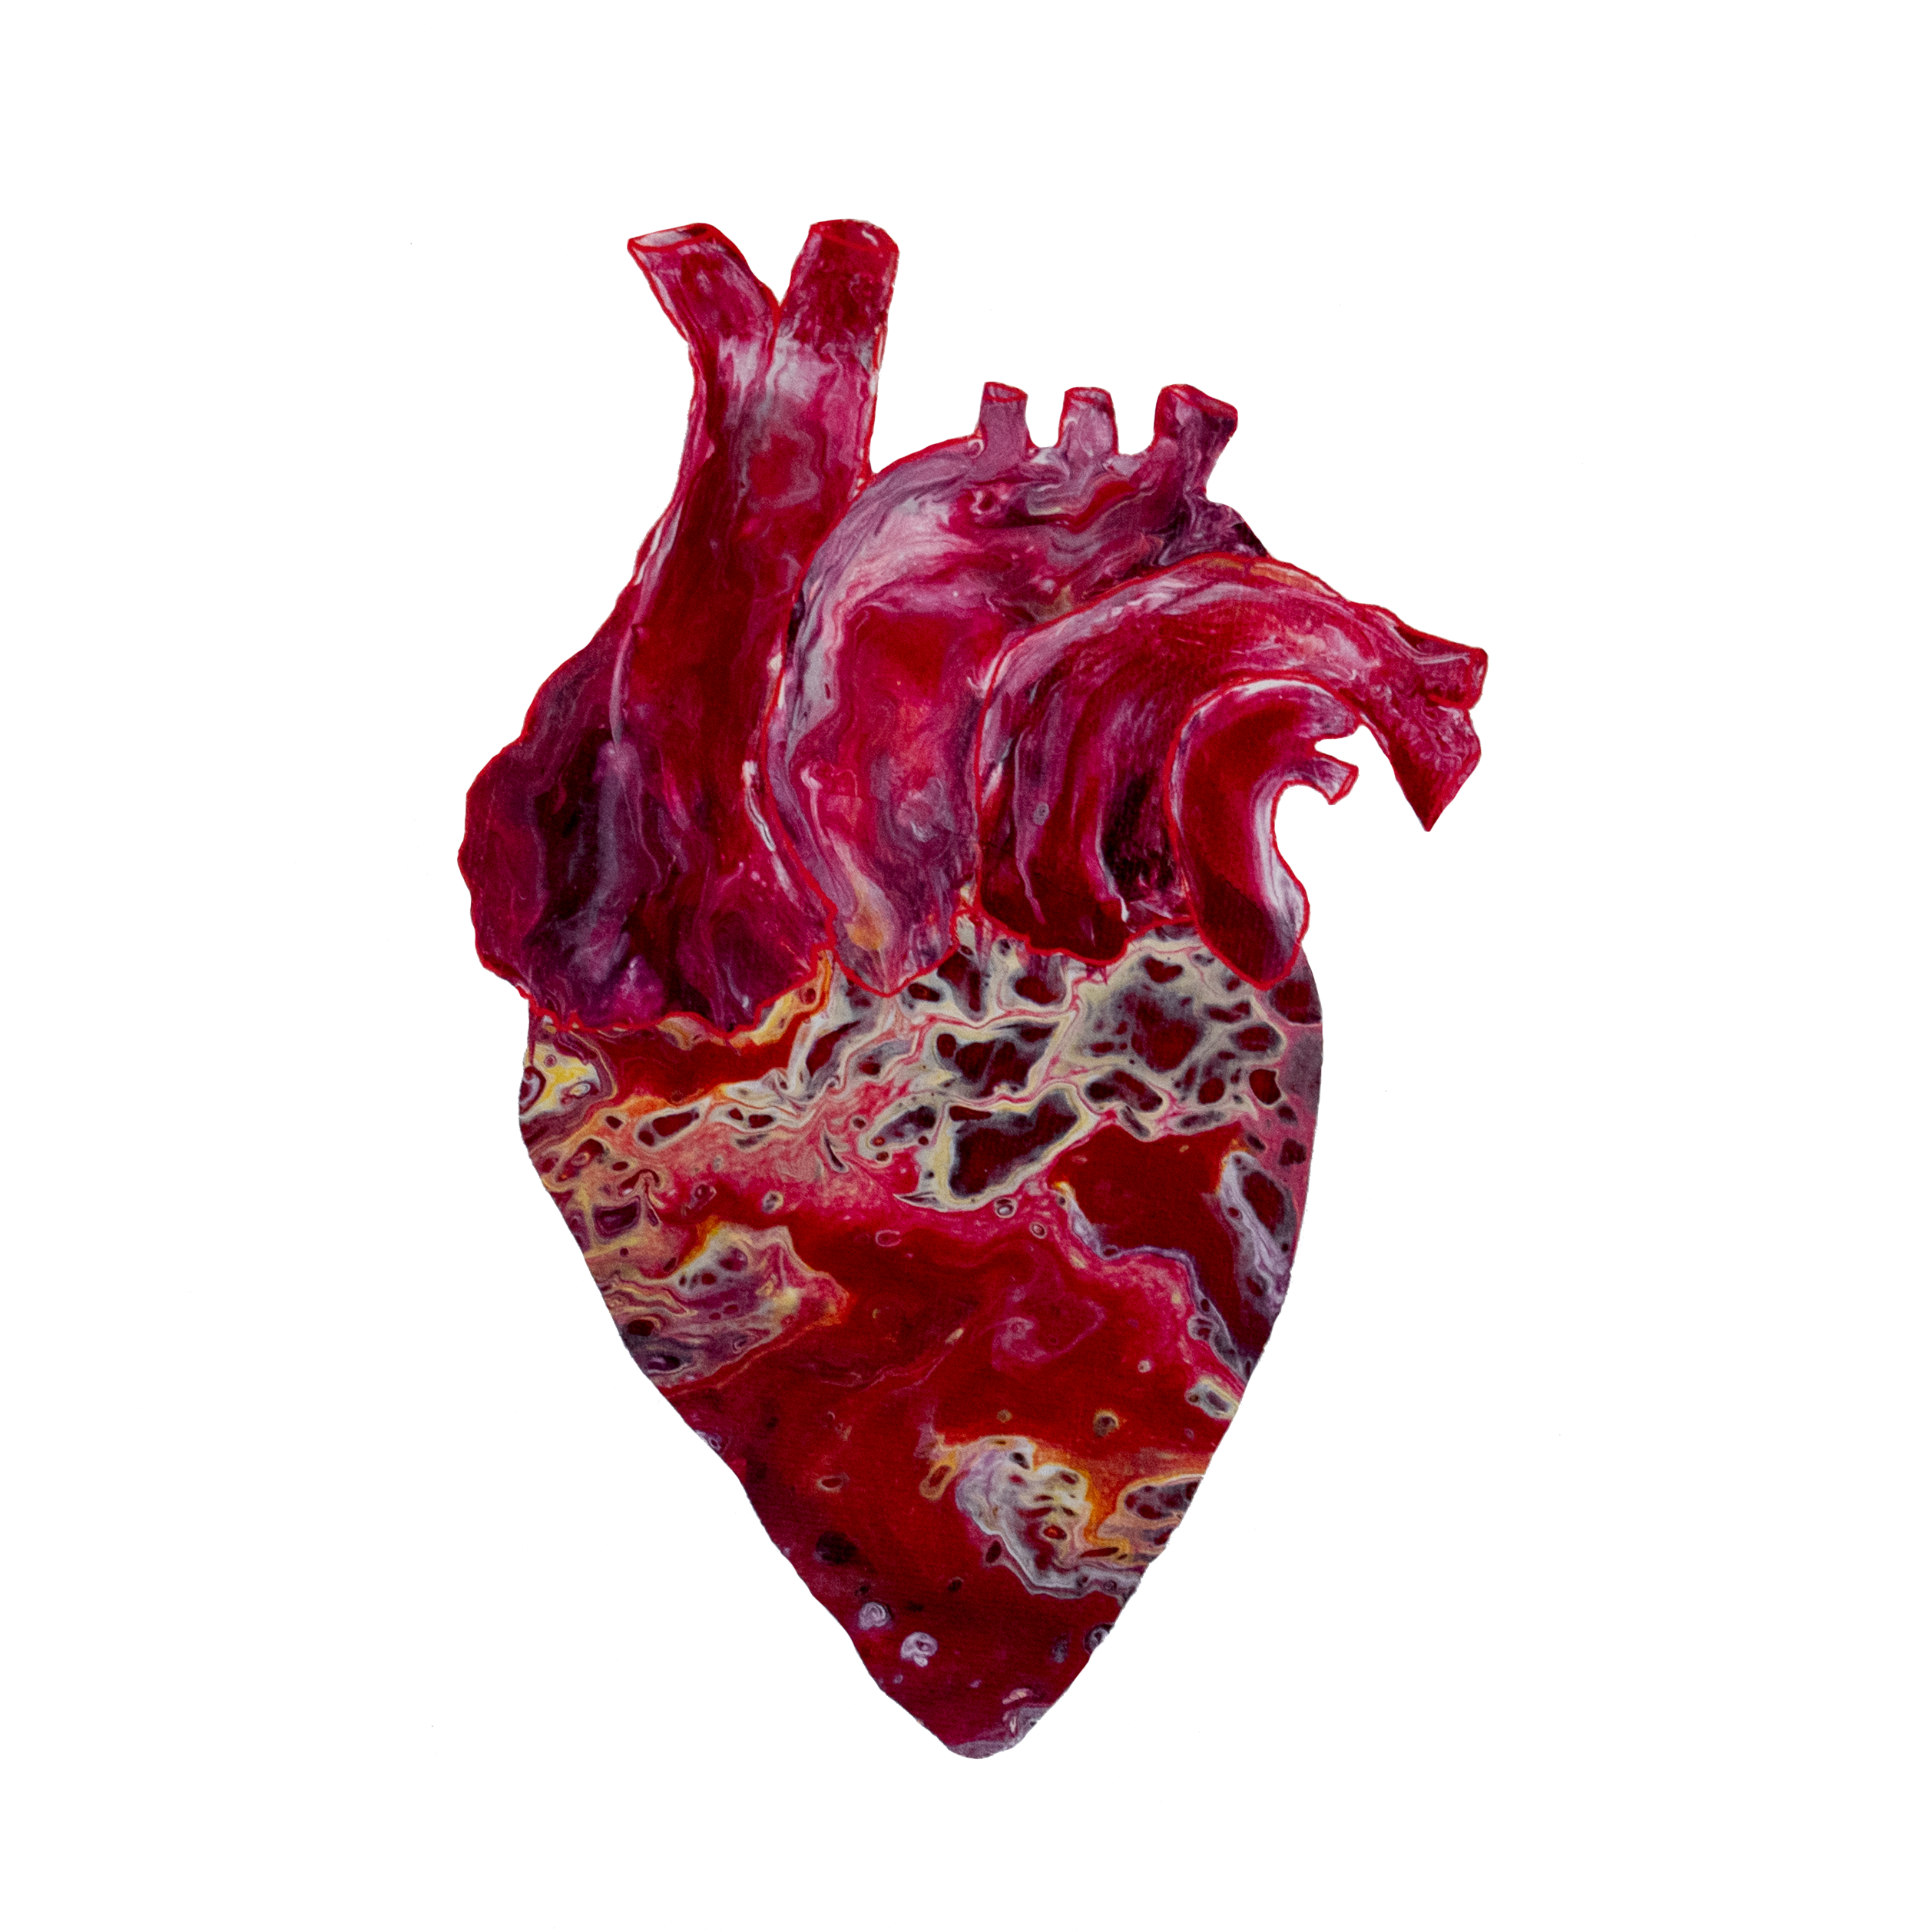 Human heart with ventricles shaped and colored with poured paints in the colors of red, pink, white, yellows